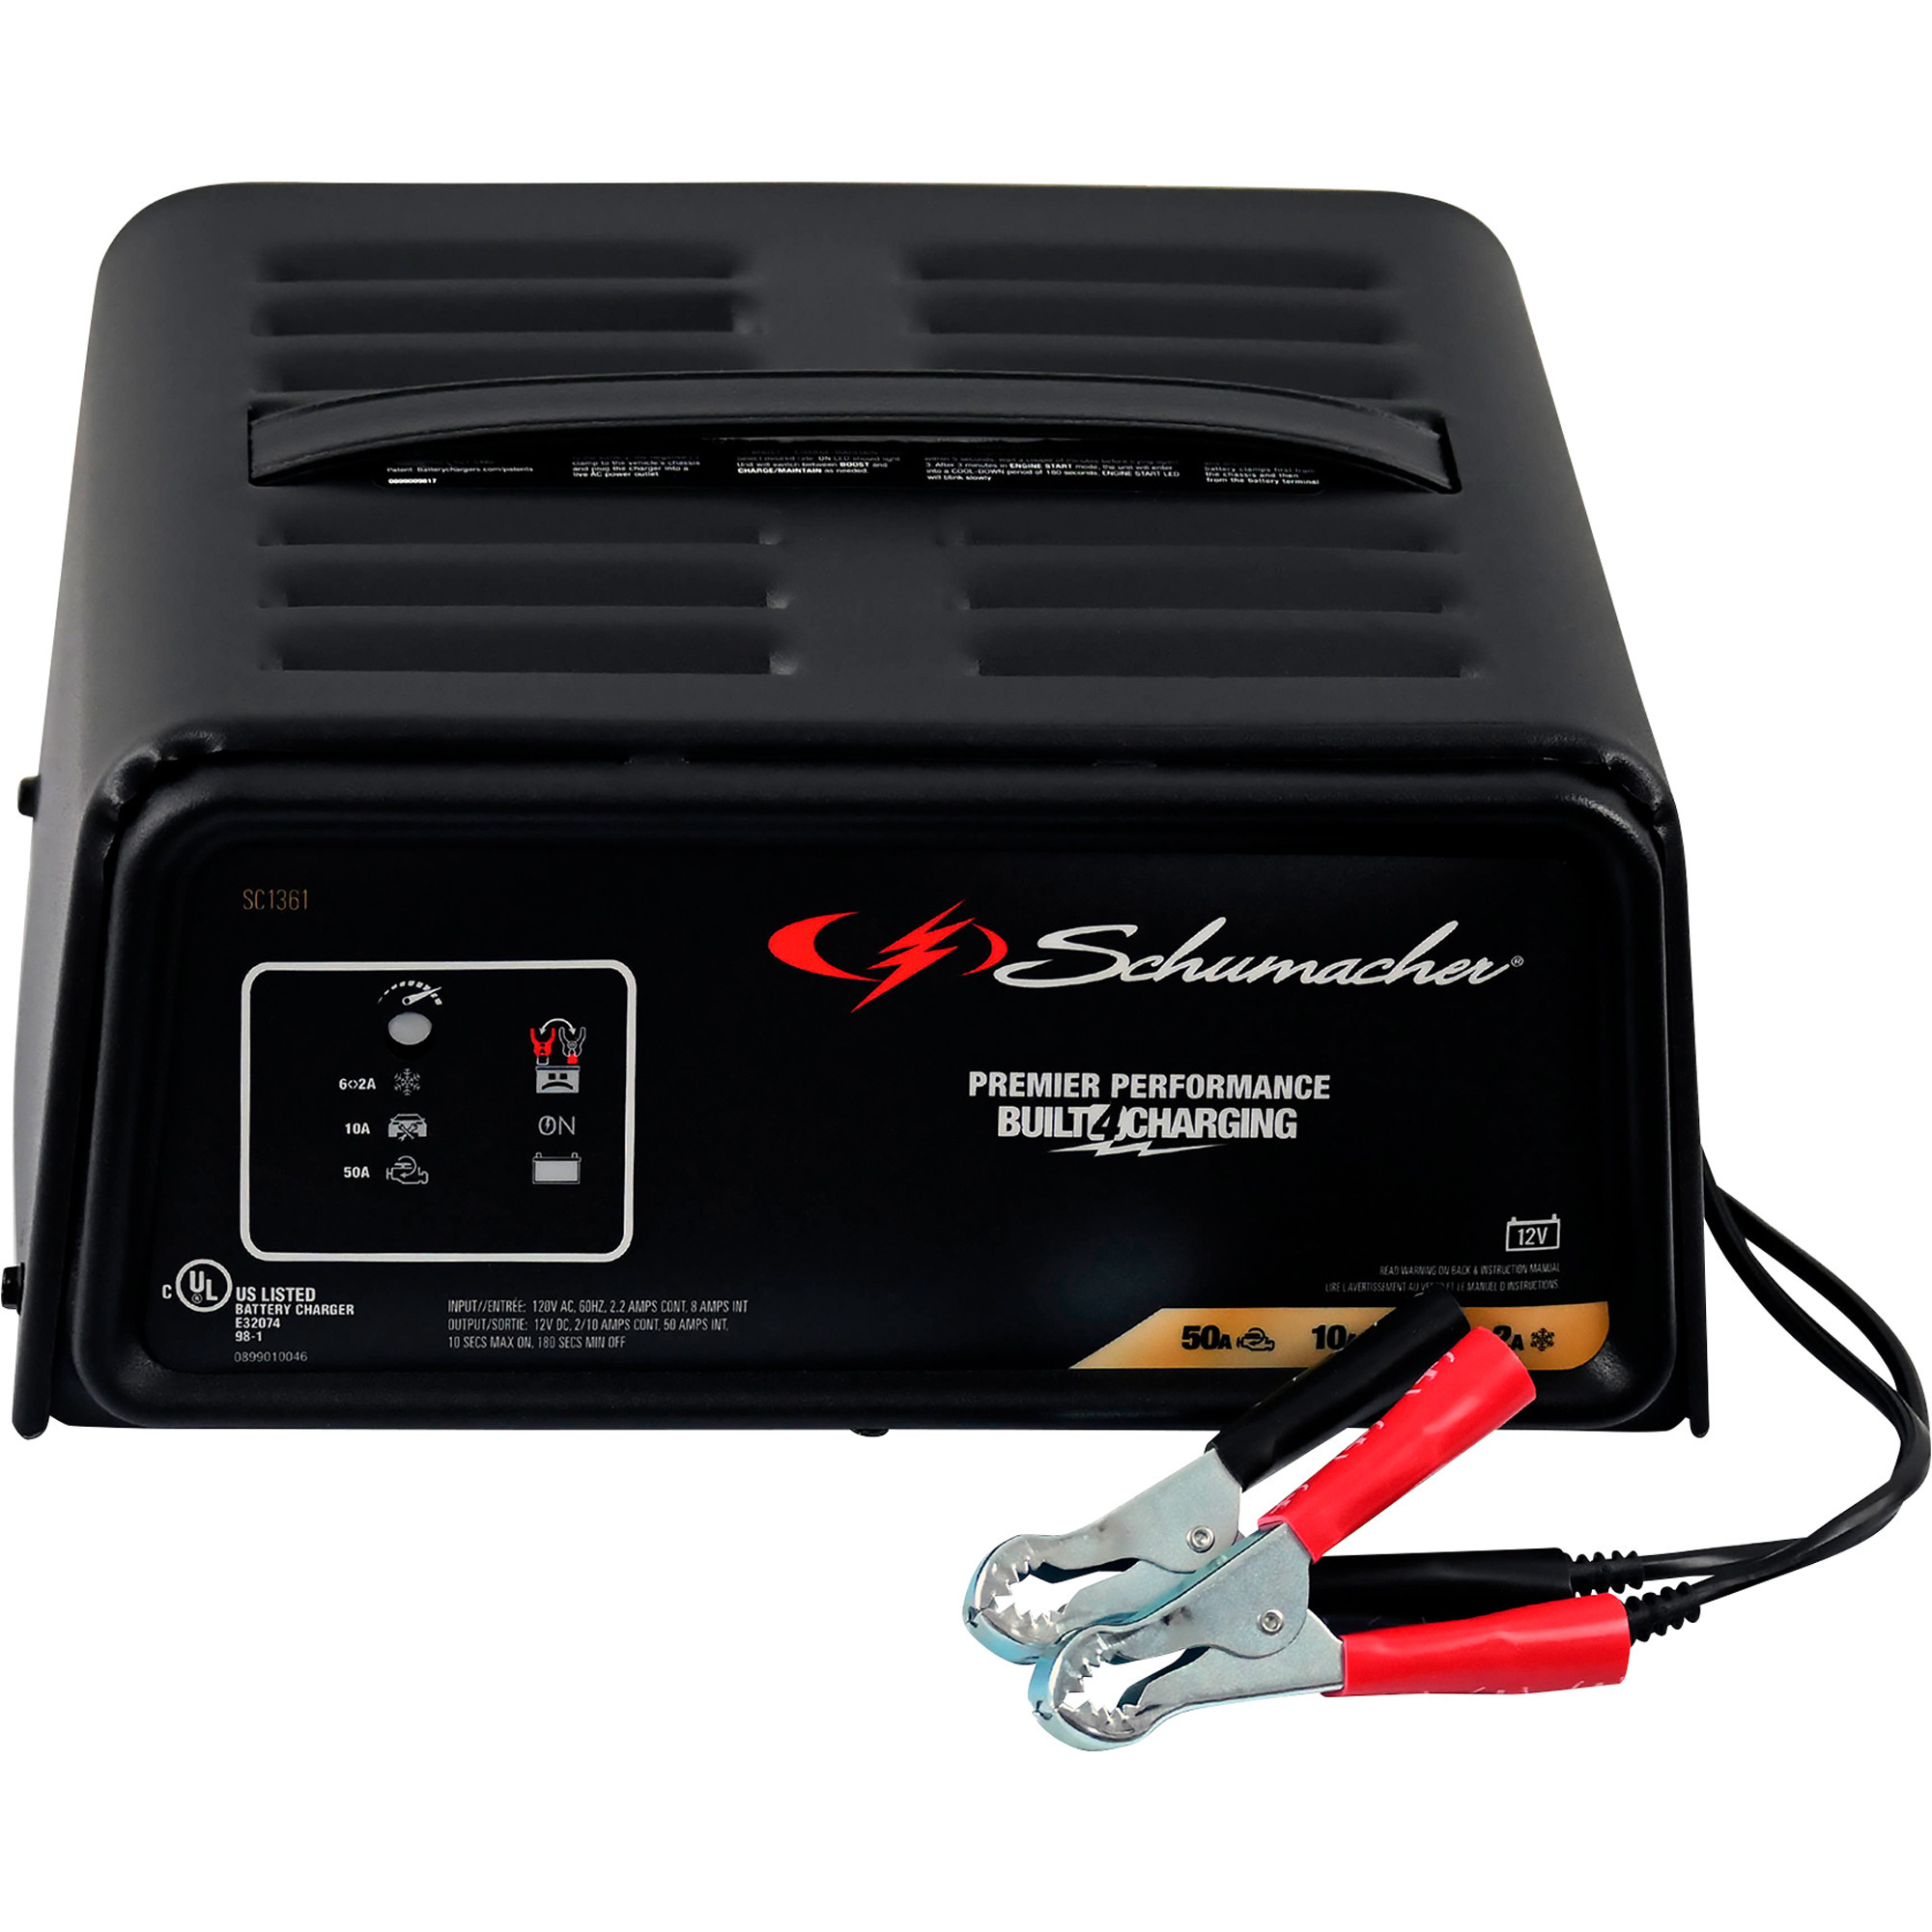 Schumacher Battery Charger/Trickle Charger/Booster/Engine Starter â 12 Volt, 50/10/2 Amp, Model SC1361